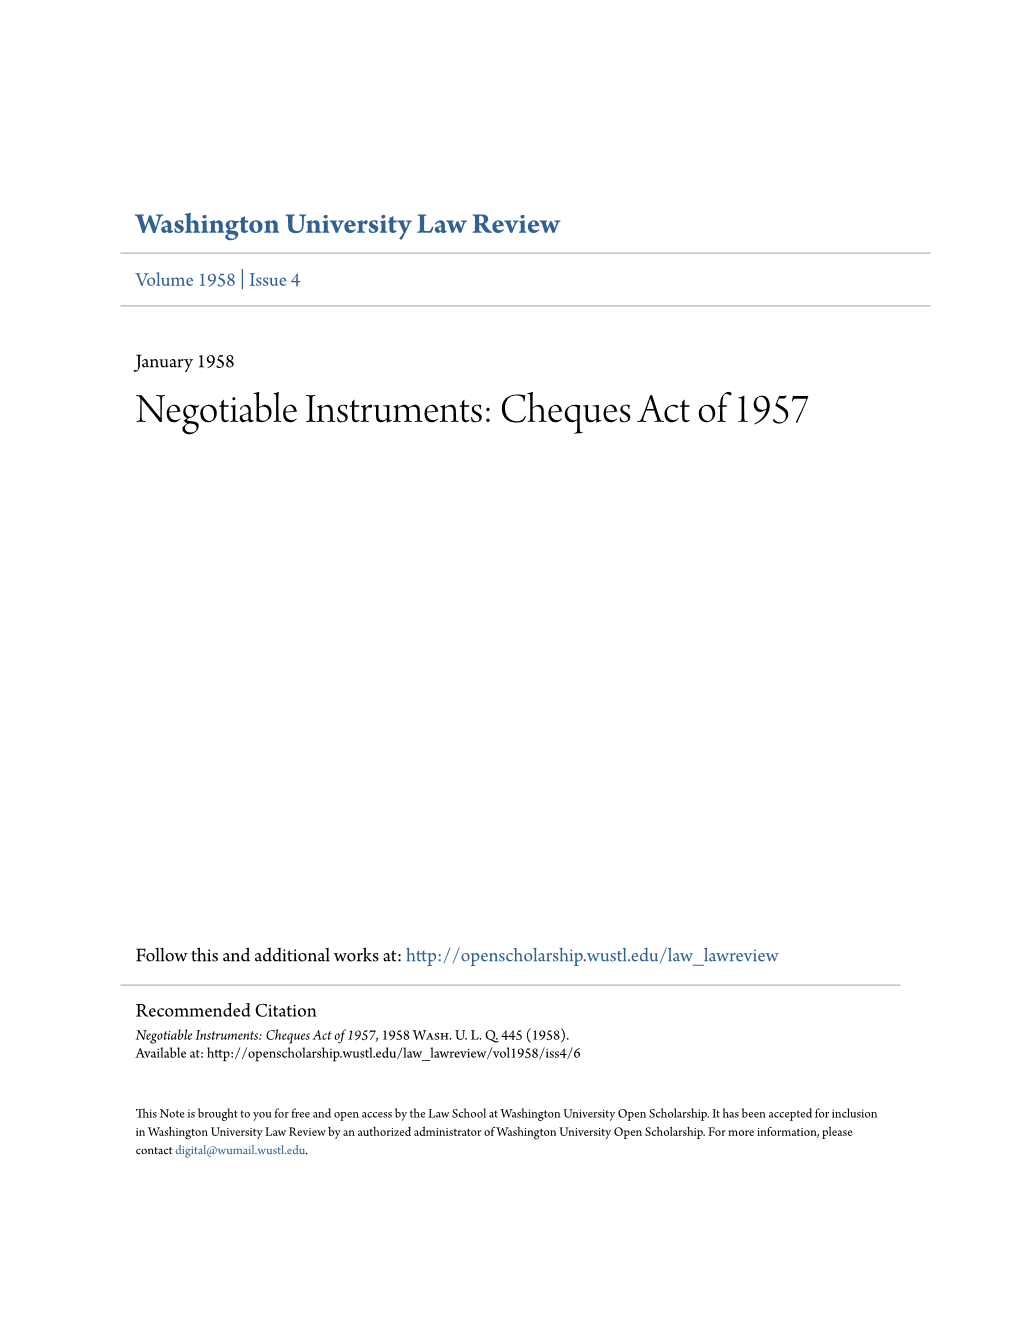 Negotiable Instruments: Cheques Act of 1957